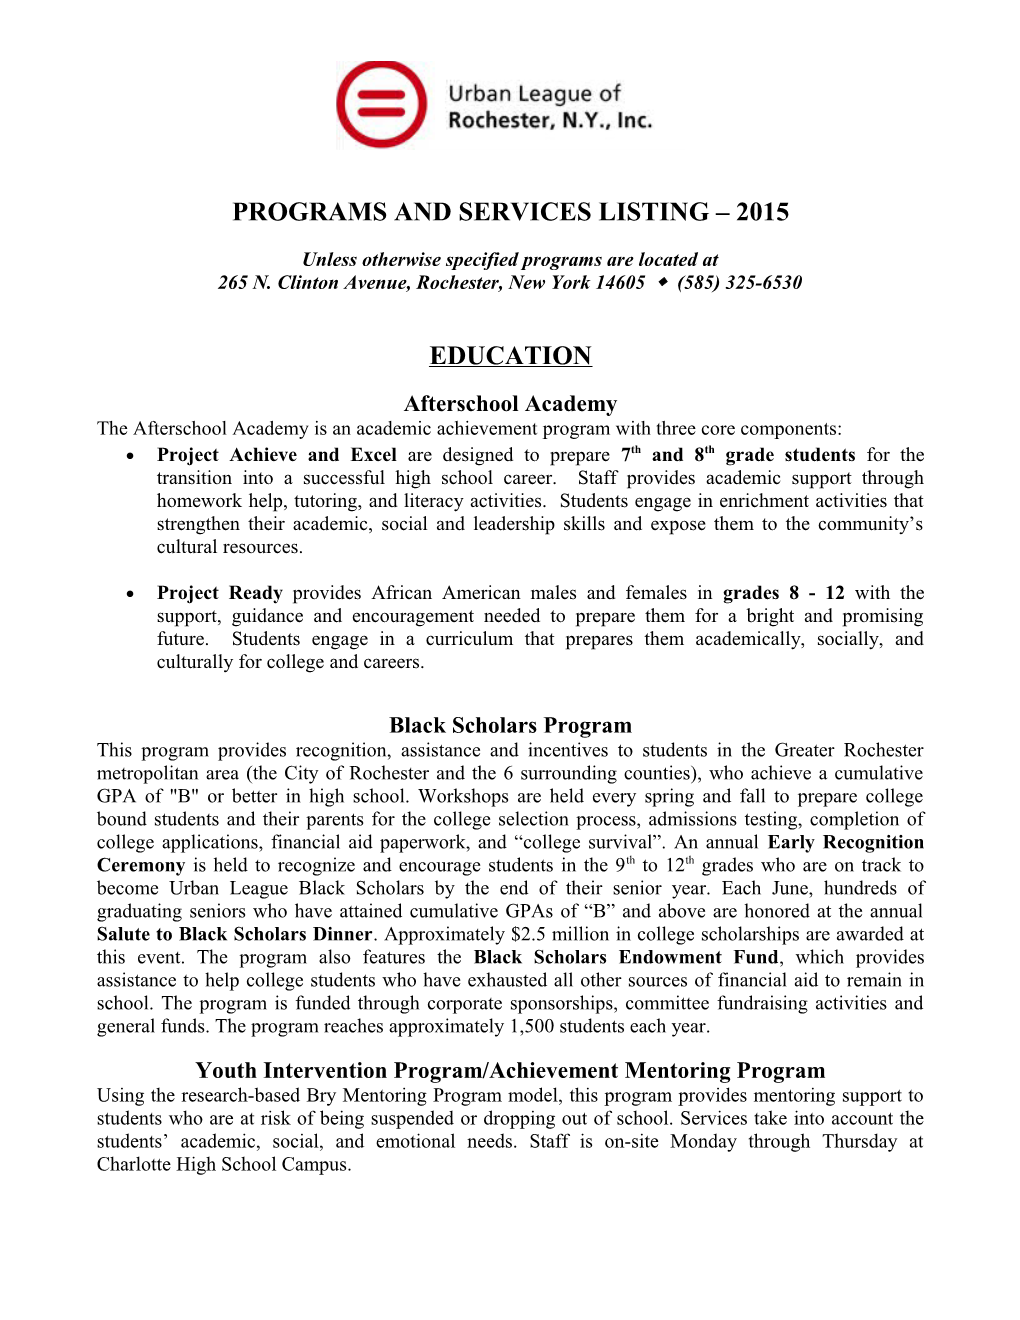 Programs and Services Listing 2015